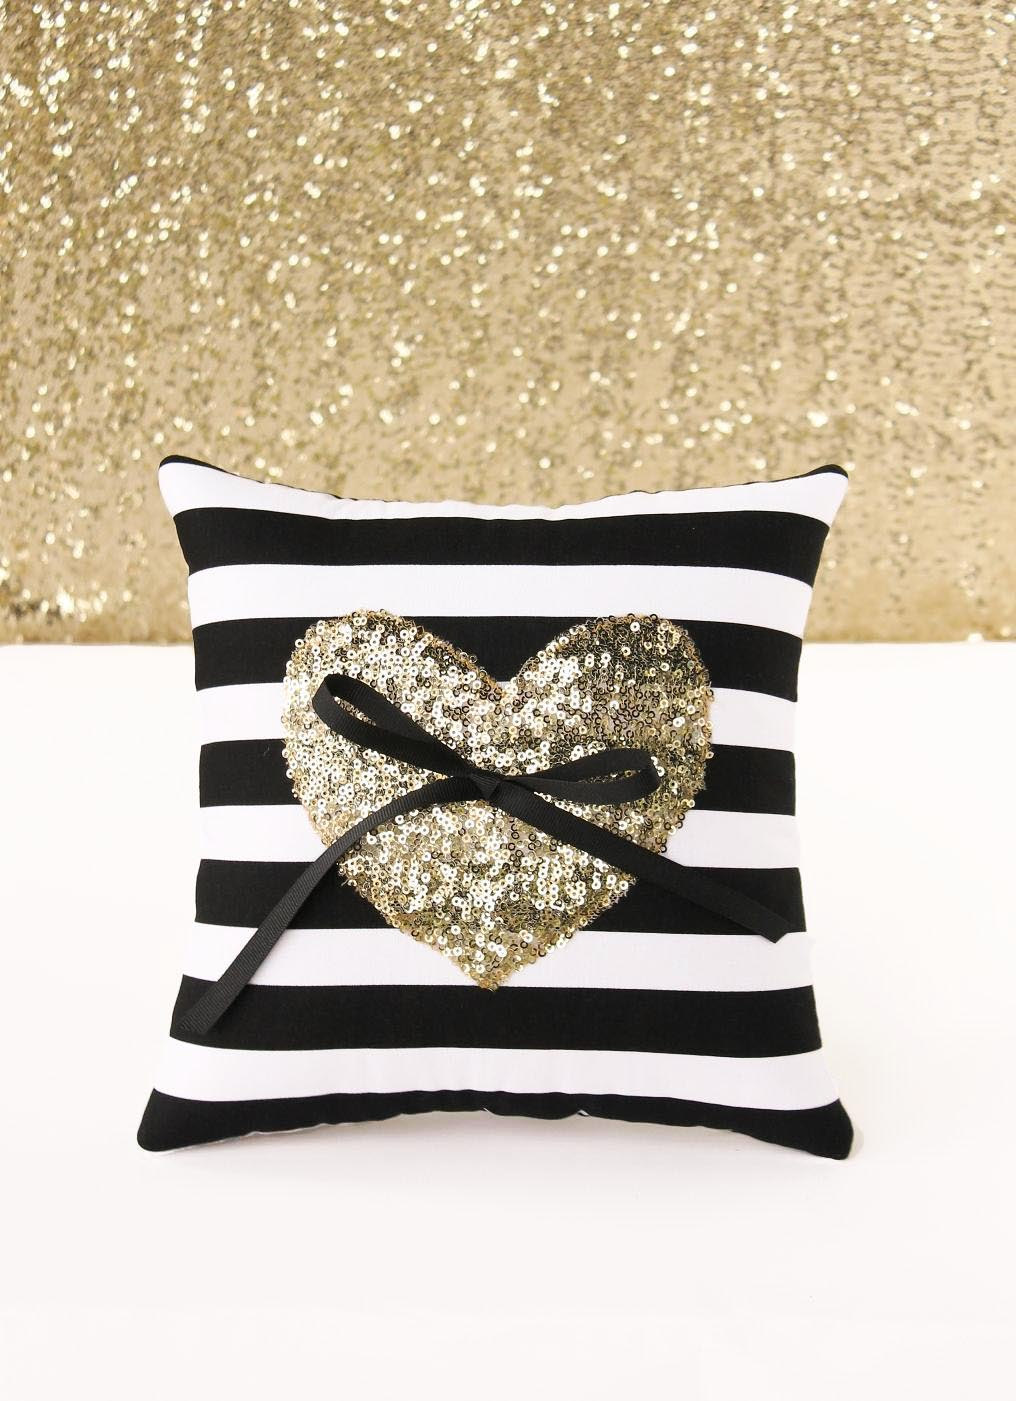 bling wedding ring pillow by stitchesandsnow